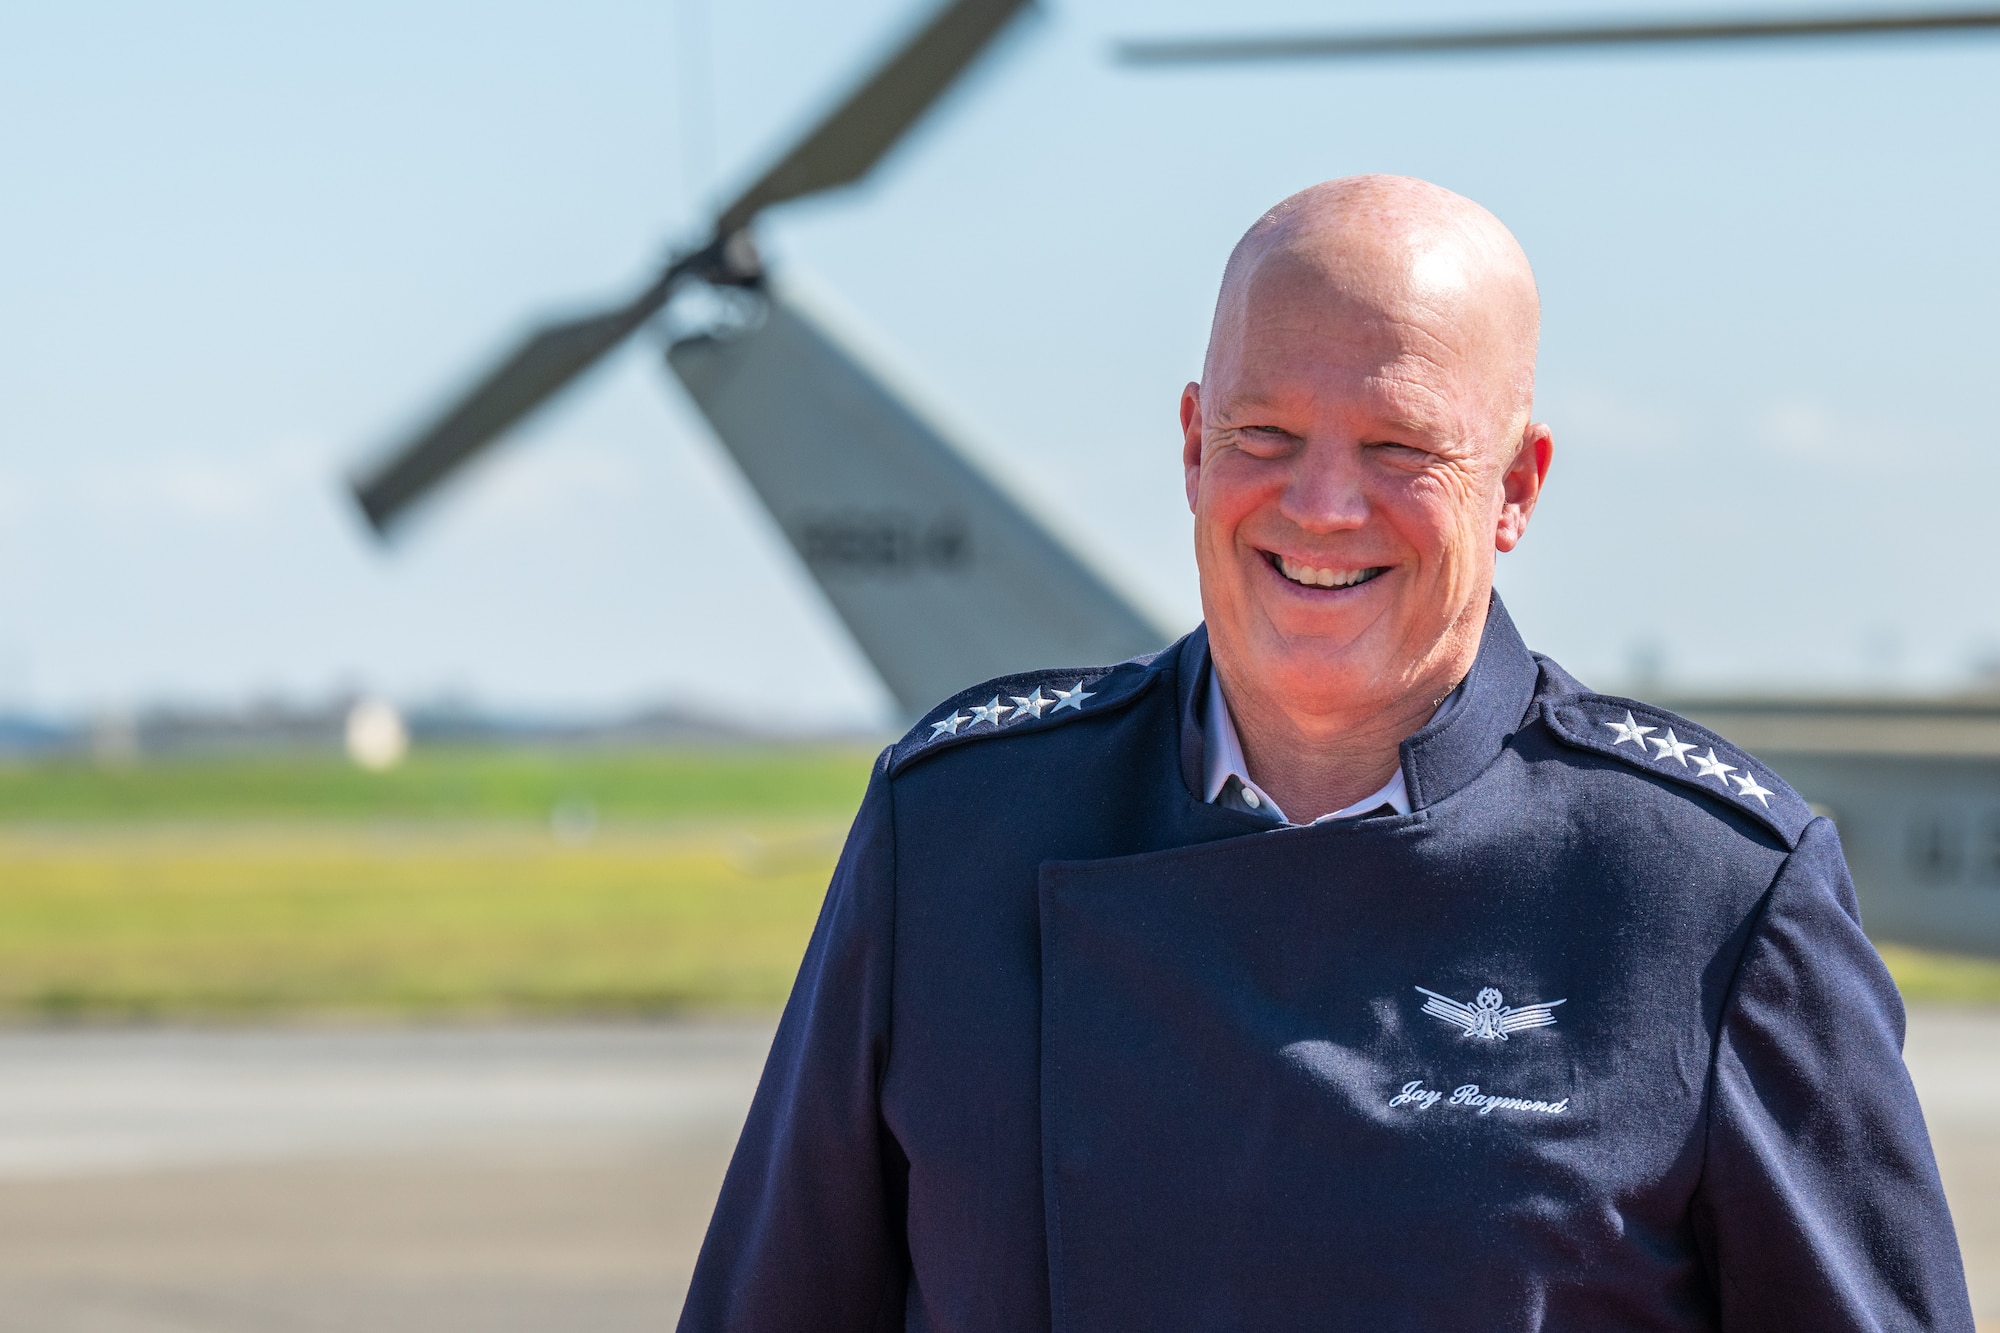 U.S. Space Force Gen. John "Jay" Raymond, Chief of Space
Operations, smiles on the flightline at Yokota Air Base, Japan, Oct. 4, 2022. During his visit, Raymond met with senior leaders, toured the base and met with Guardians assigned to the 374th Airlift Wing. (U.S. Air Force photo by Staff Sgt. Jessica Avallone)